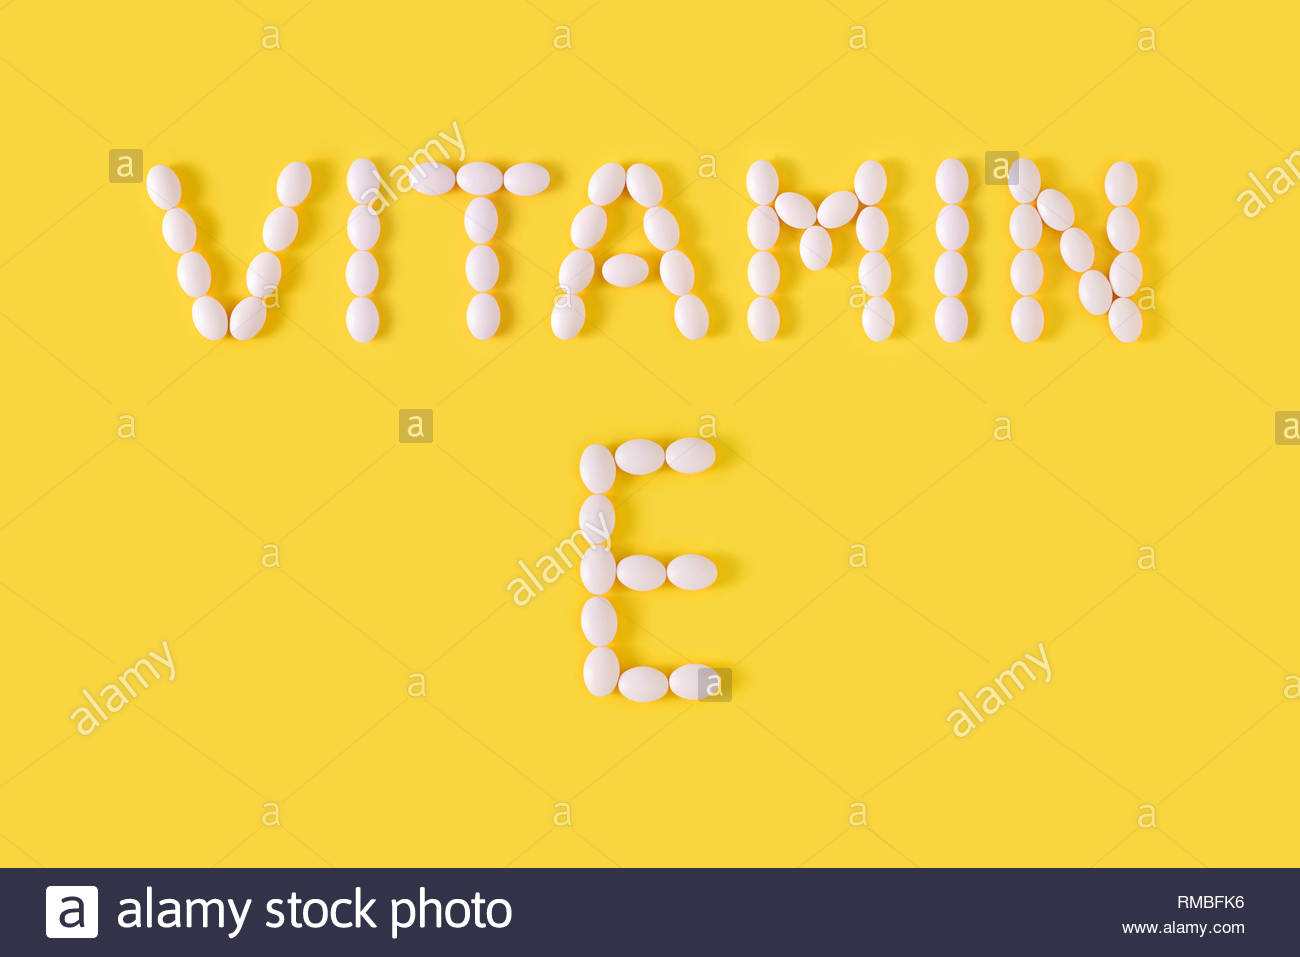 Vitamin E Pills Dropped From Bottle On Yellow Background Flat Lay